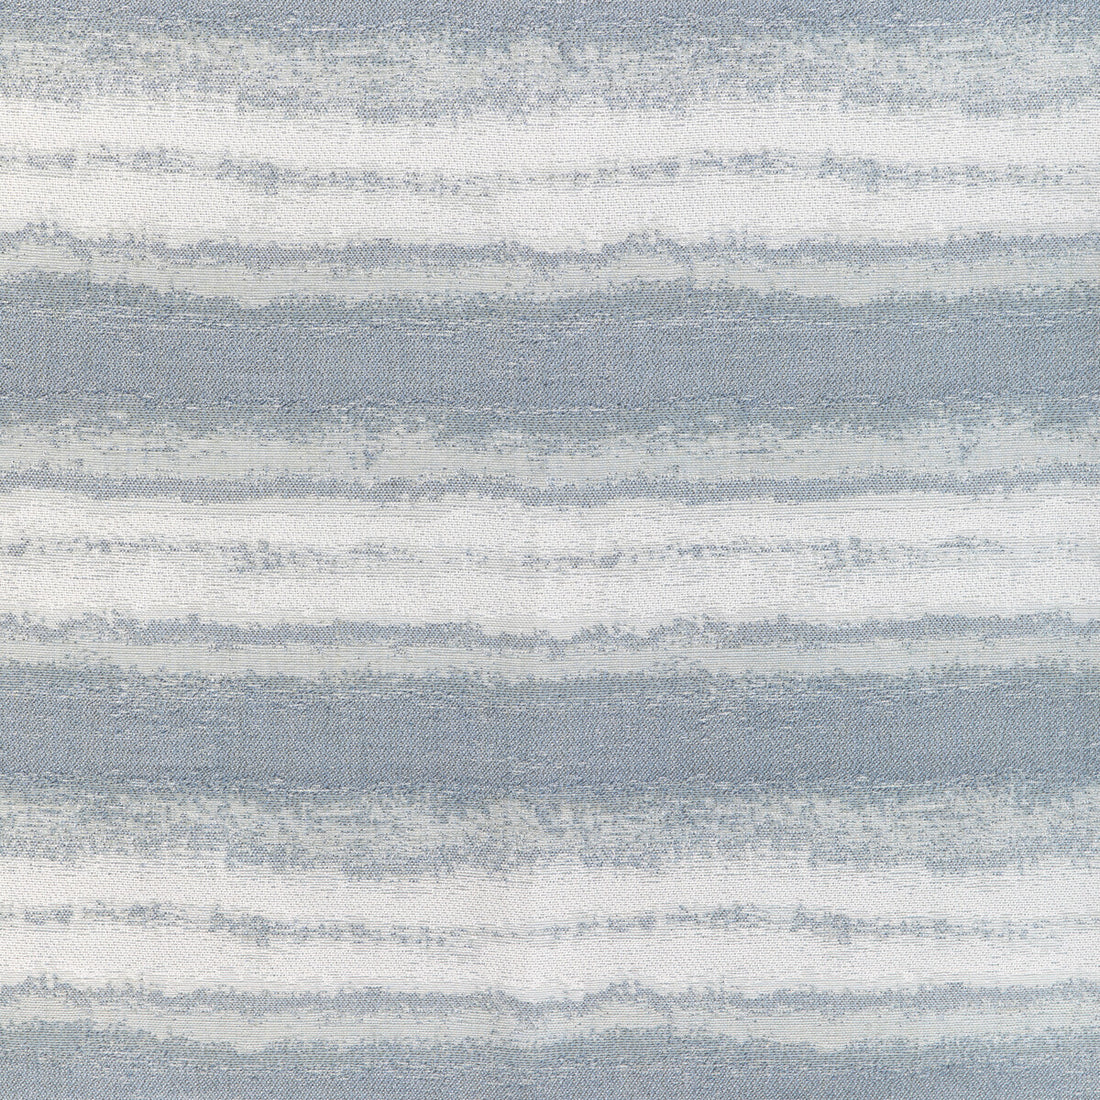 Riverwalk fabric in ocean color - pattern 36932.15.0 - by Kravet Couture in the Riviera collection